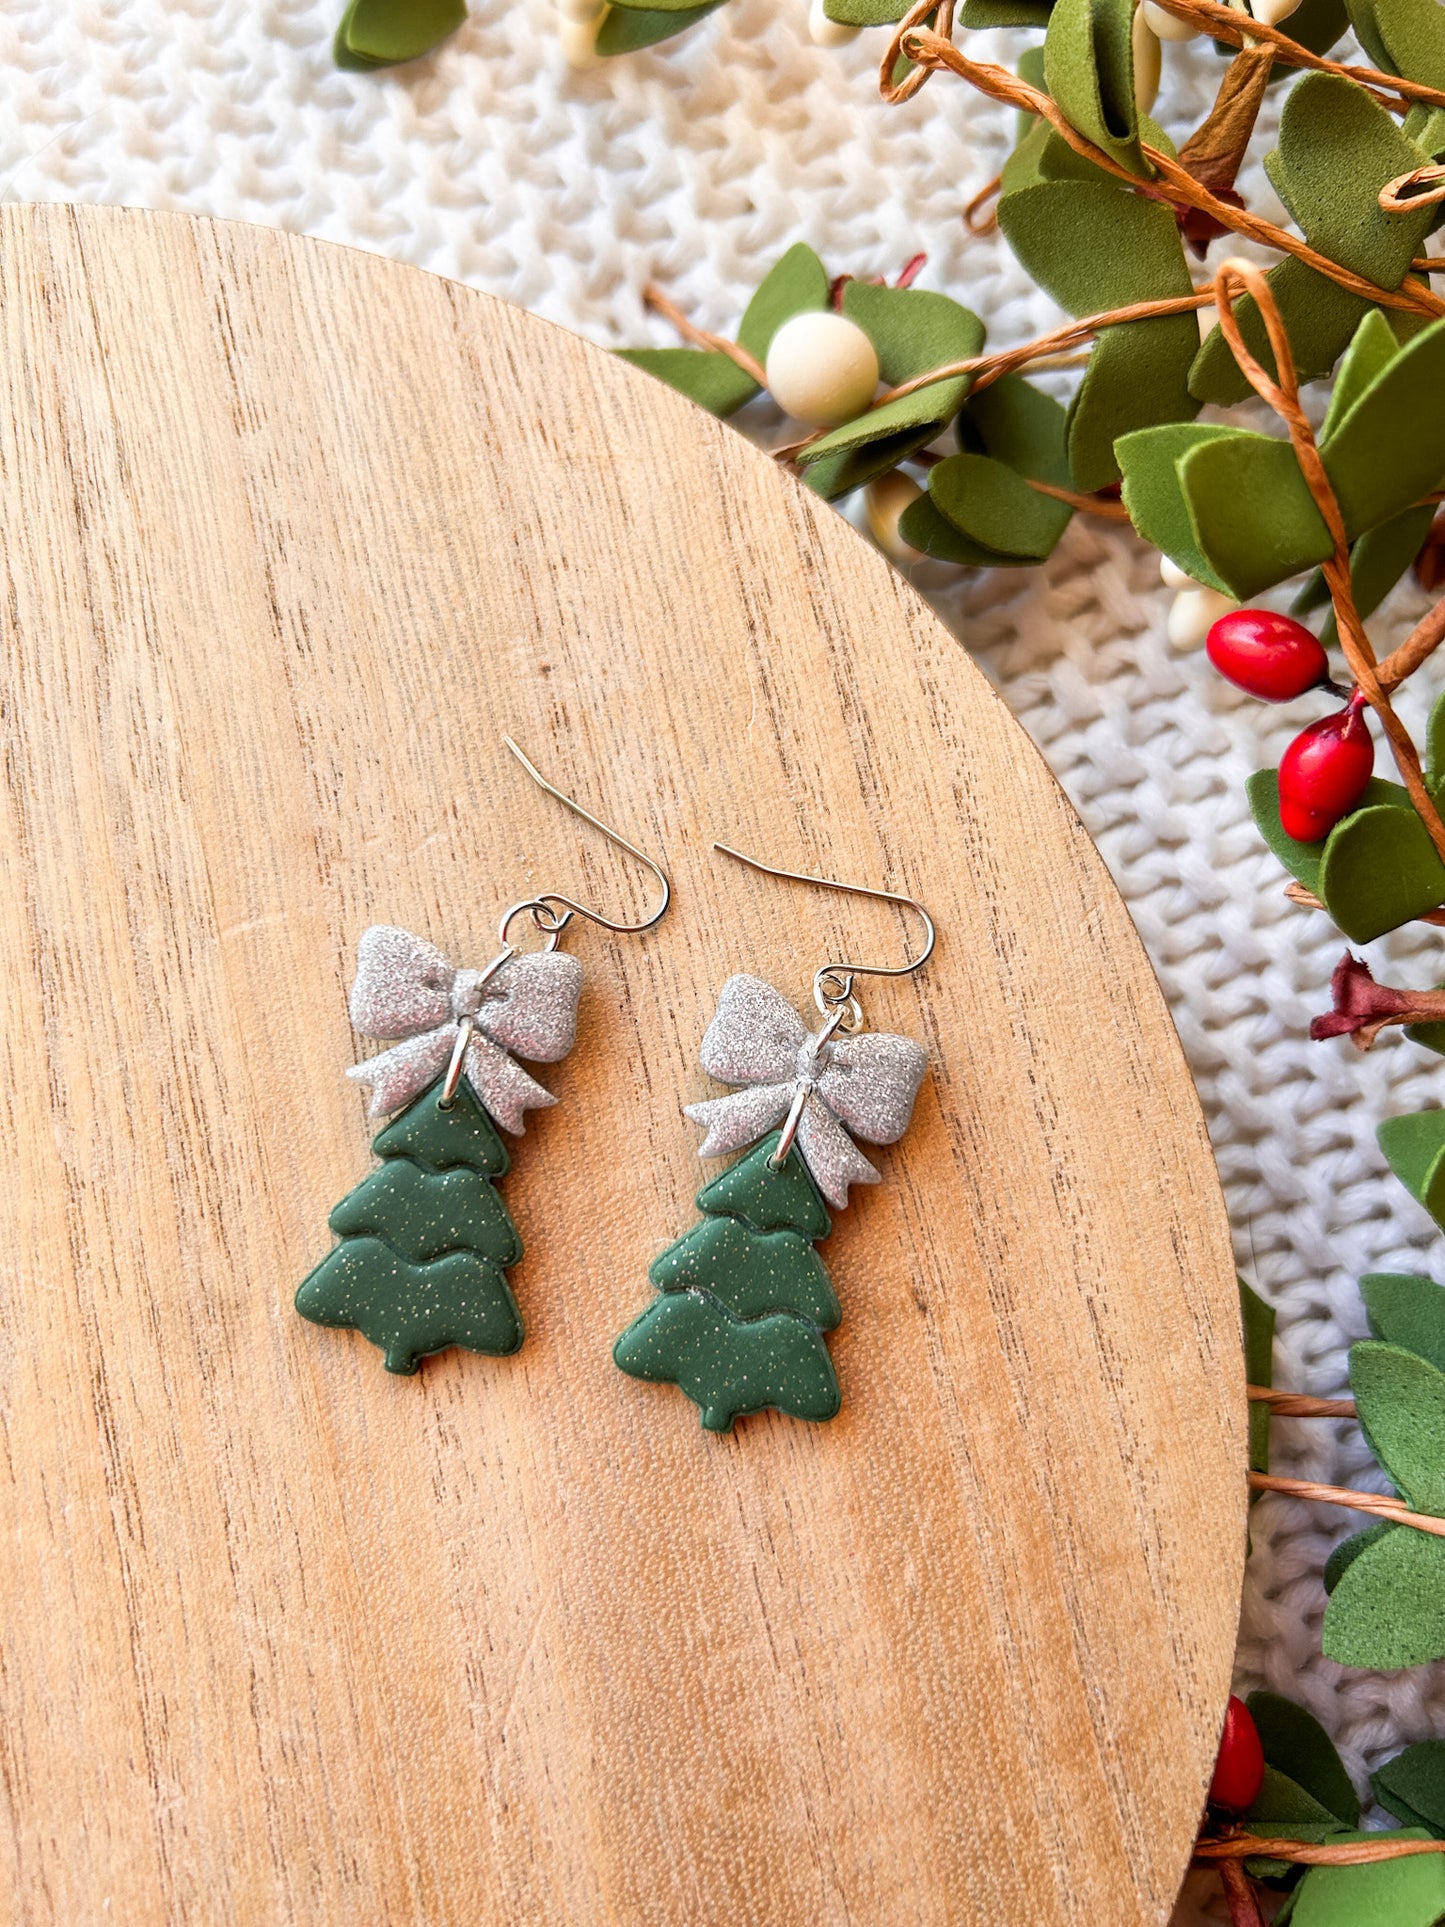 Wrap it Up Christmas Tree Bow Earrings | Clay Earrings | Holiday Gifts | Stocking Stuffer Ideas | Christmas Earrings | Lightweight